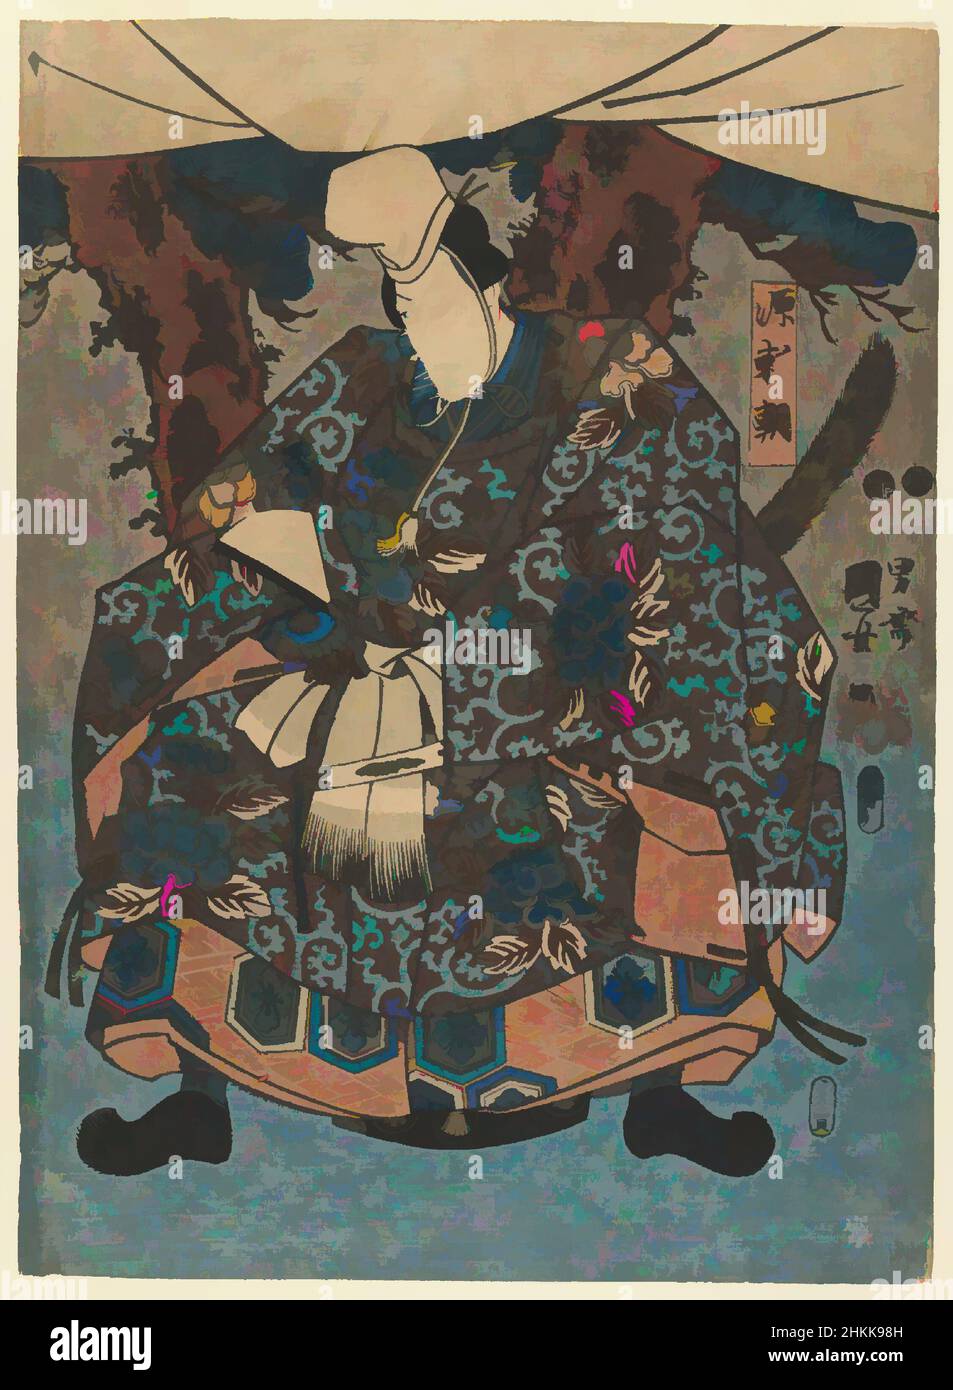 Art inspired by Actor as Minamoto Yoritomo, Kuniyoshi Ichiyusai, Japanese, 1797-1861, Color woodblock print on paper, Japan, 1849-1850, Edo Period, 13 3/8 x 9 3/4 in., 34 x 24.8 cm, Actor, Japanese, Print, Woodblock, Classic works modernized by Artotop with a splash of modernity. Shapes, color and value, eye-catching visual impact on art. Emotions through freedom of artworks in a contemporary way. A timeless message pursuing a wildly creative new direction. Artists turning to the digital medium and creating the Artotop NFT Stock Photo